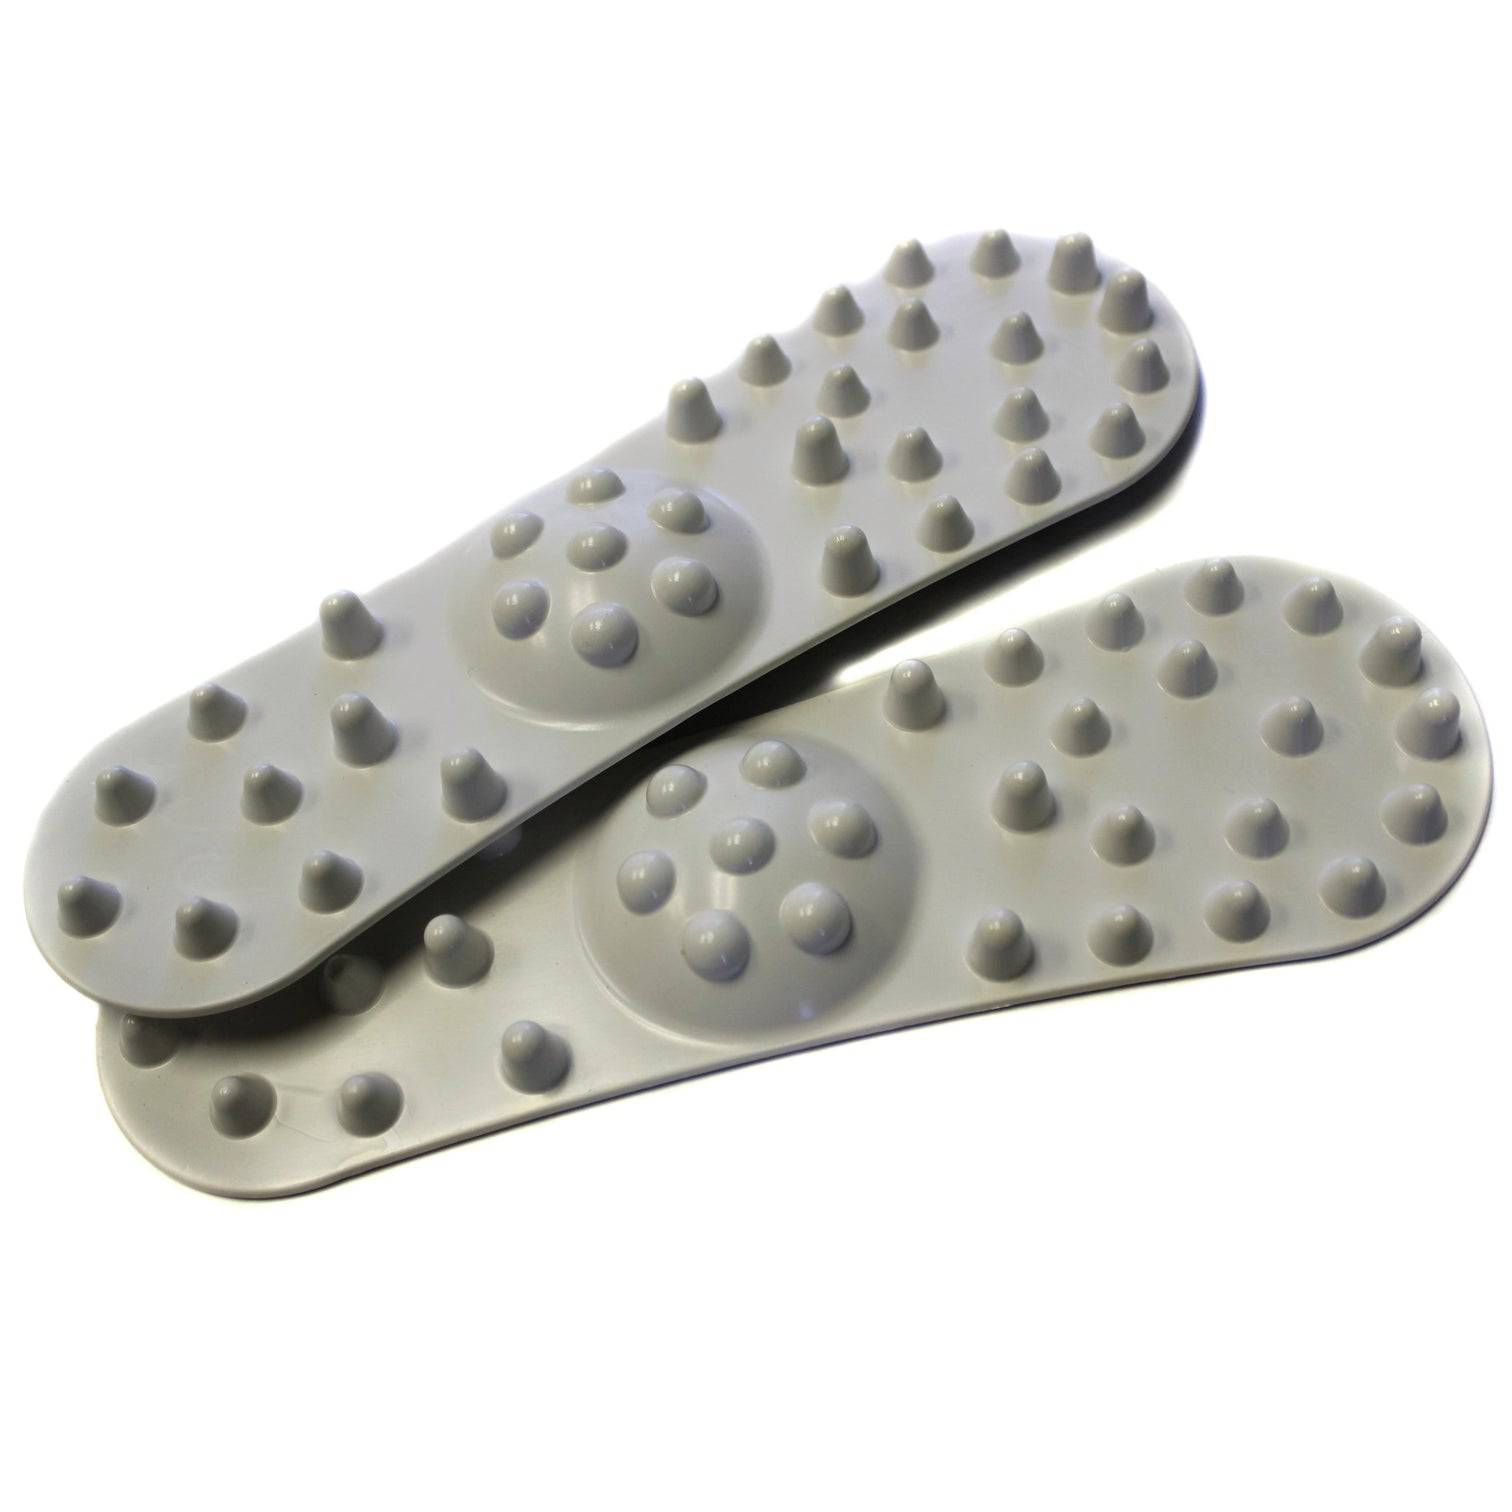 Air Relax | Acupressure Foot Insert - XTC Fitness - Exercise Equipment Superstore - Canada - Air Compression